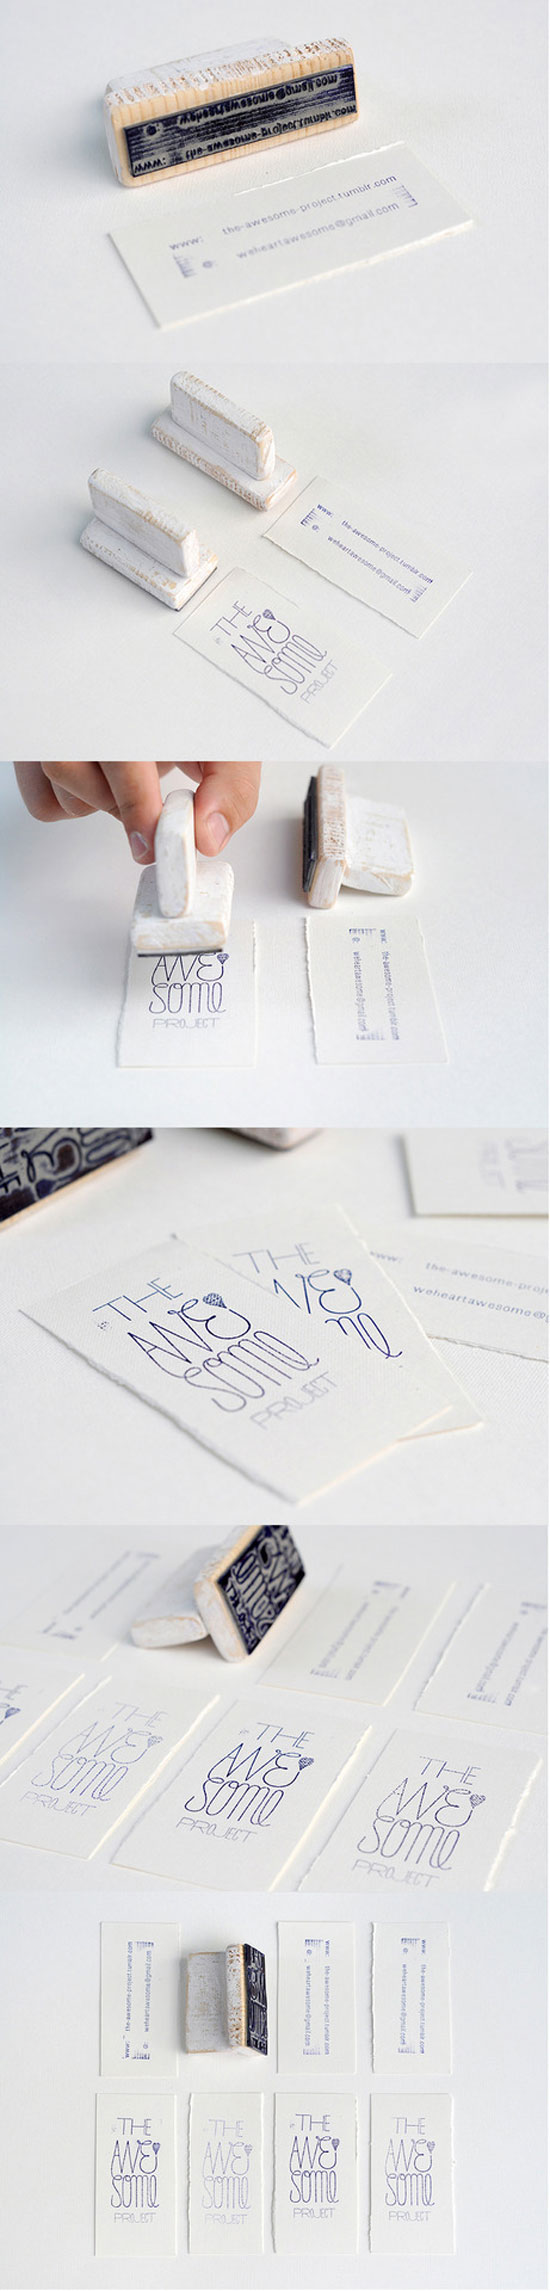 The Awesome Project Business Card